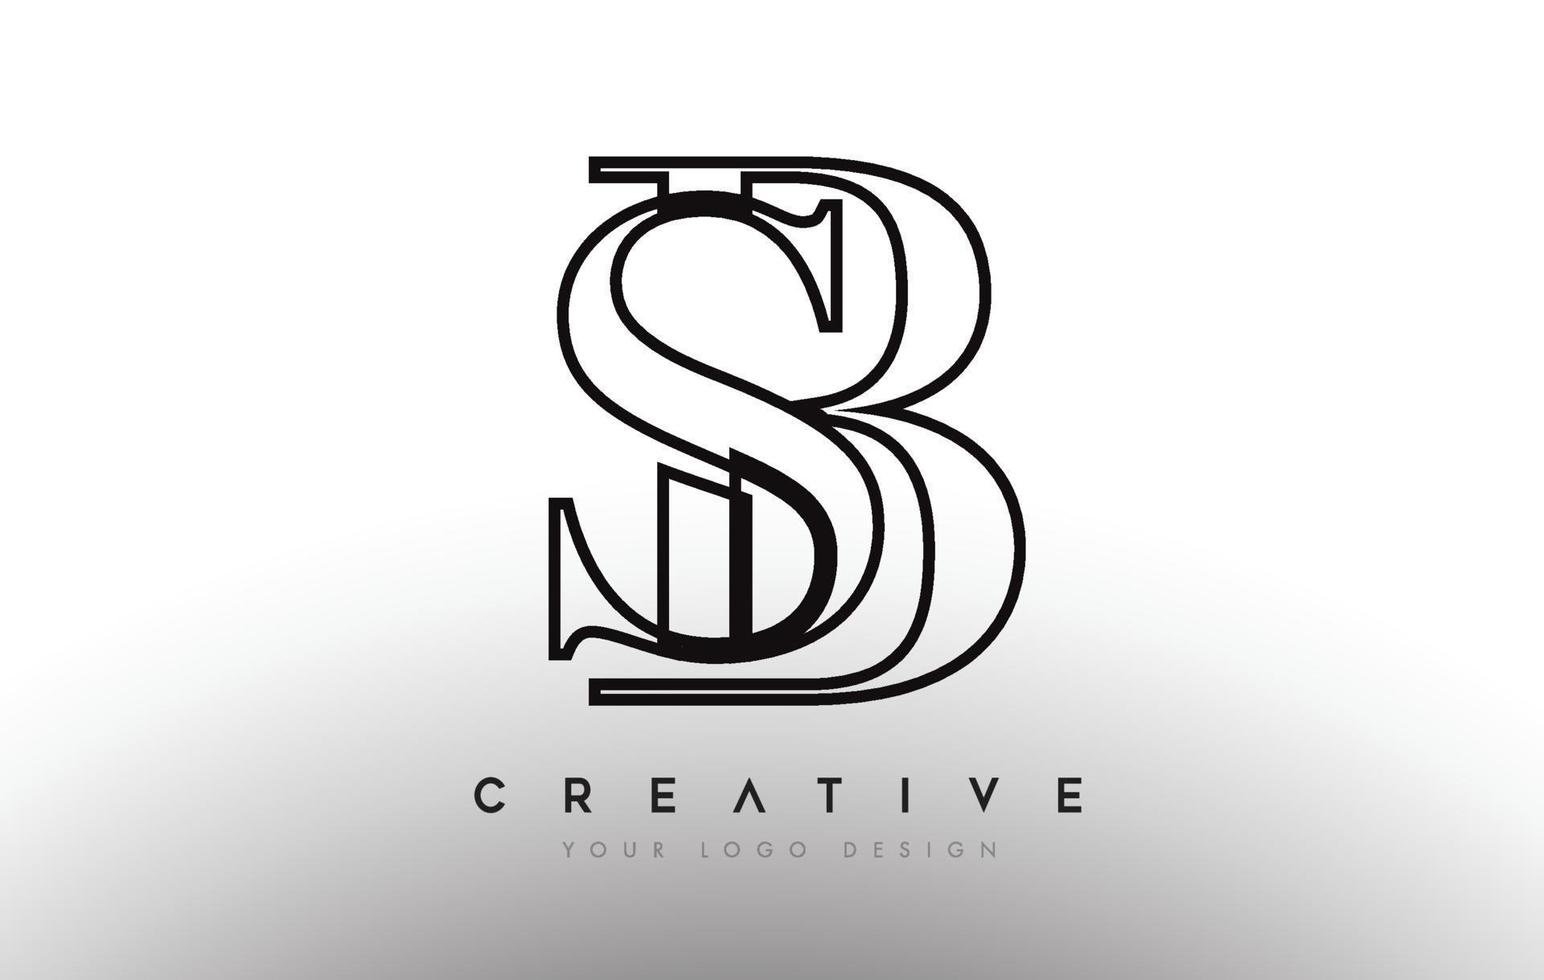 SB sb letter design logo logotype icon concept with serif font and ...